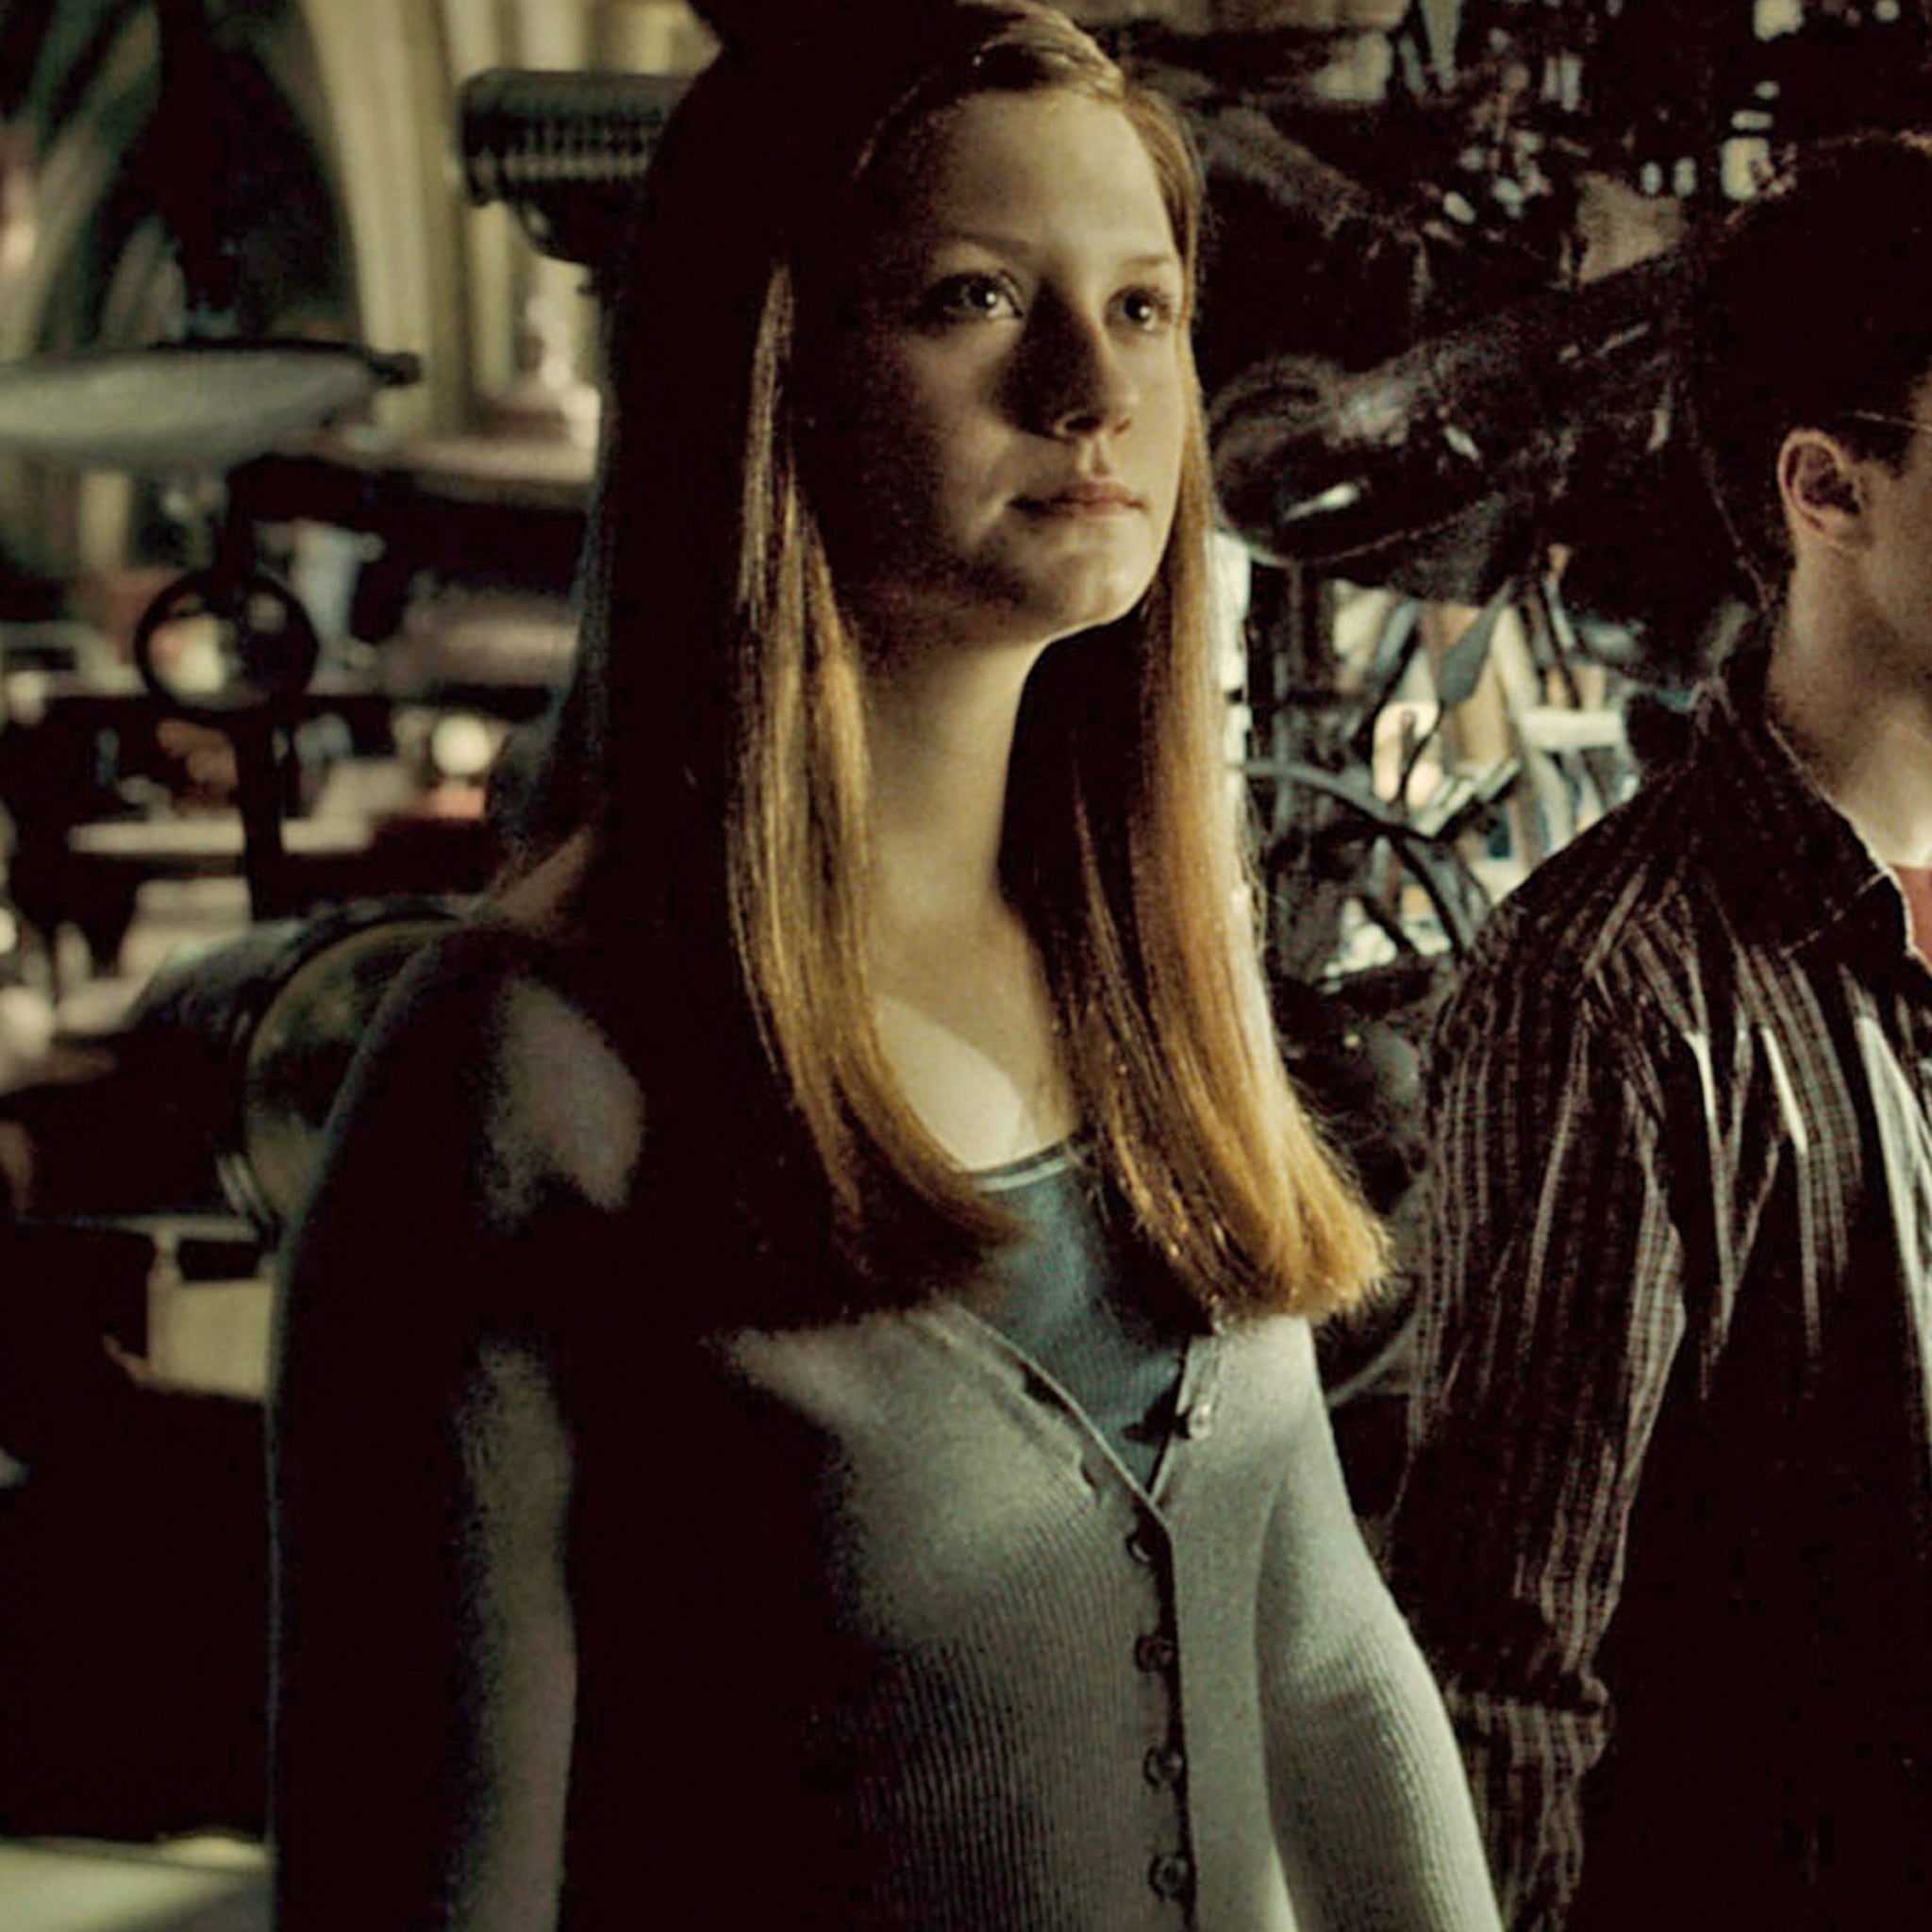 Harry Potter's Bonnie Wright On Why Ginny's Character In The Movies Was  'Disappointing